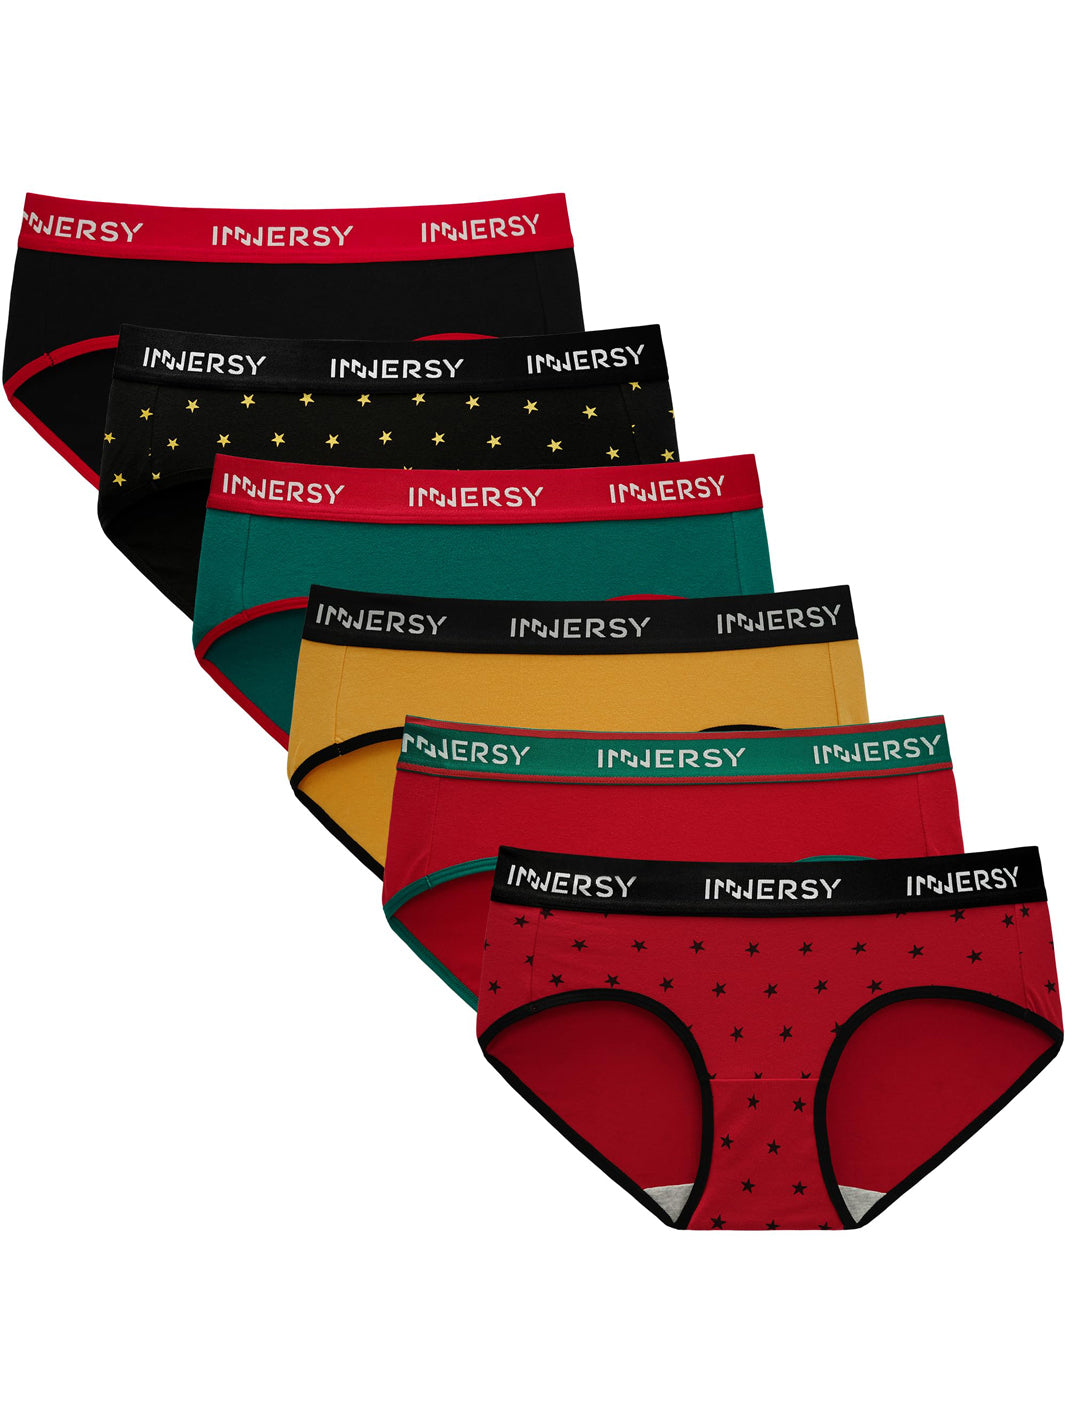 INNERSY Womens Cotton Underwear Hipster Black Panties Wide Waistband 6-Pack  (XS, Black) 